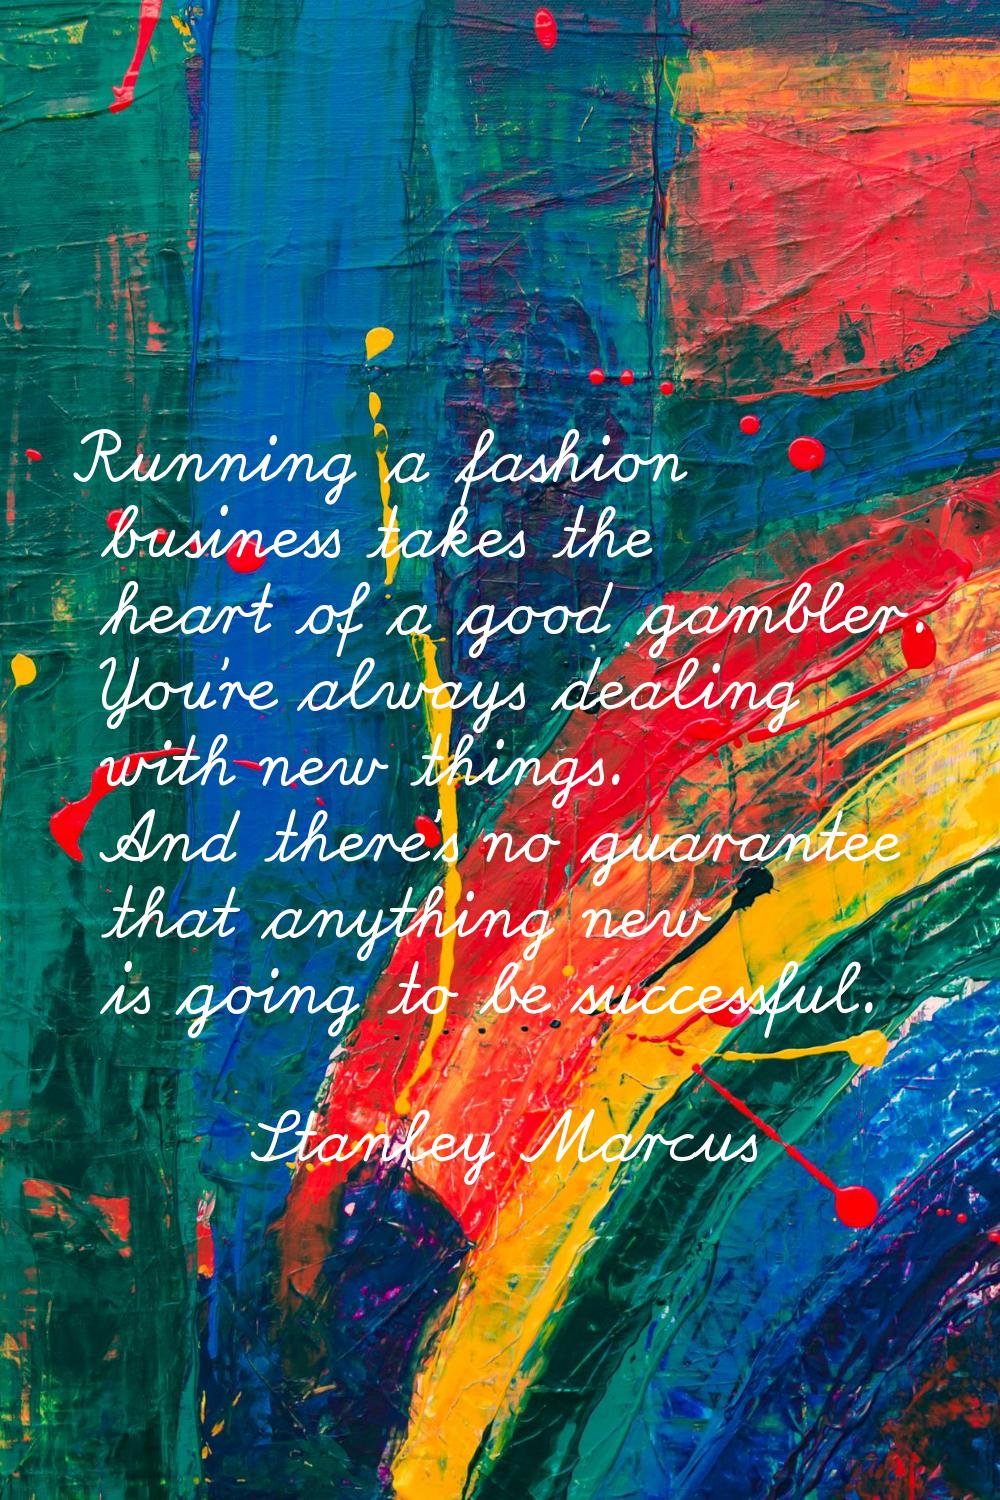 Running a fashion business takes the heart of a good gambler. You're always dealing with new things